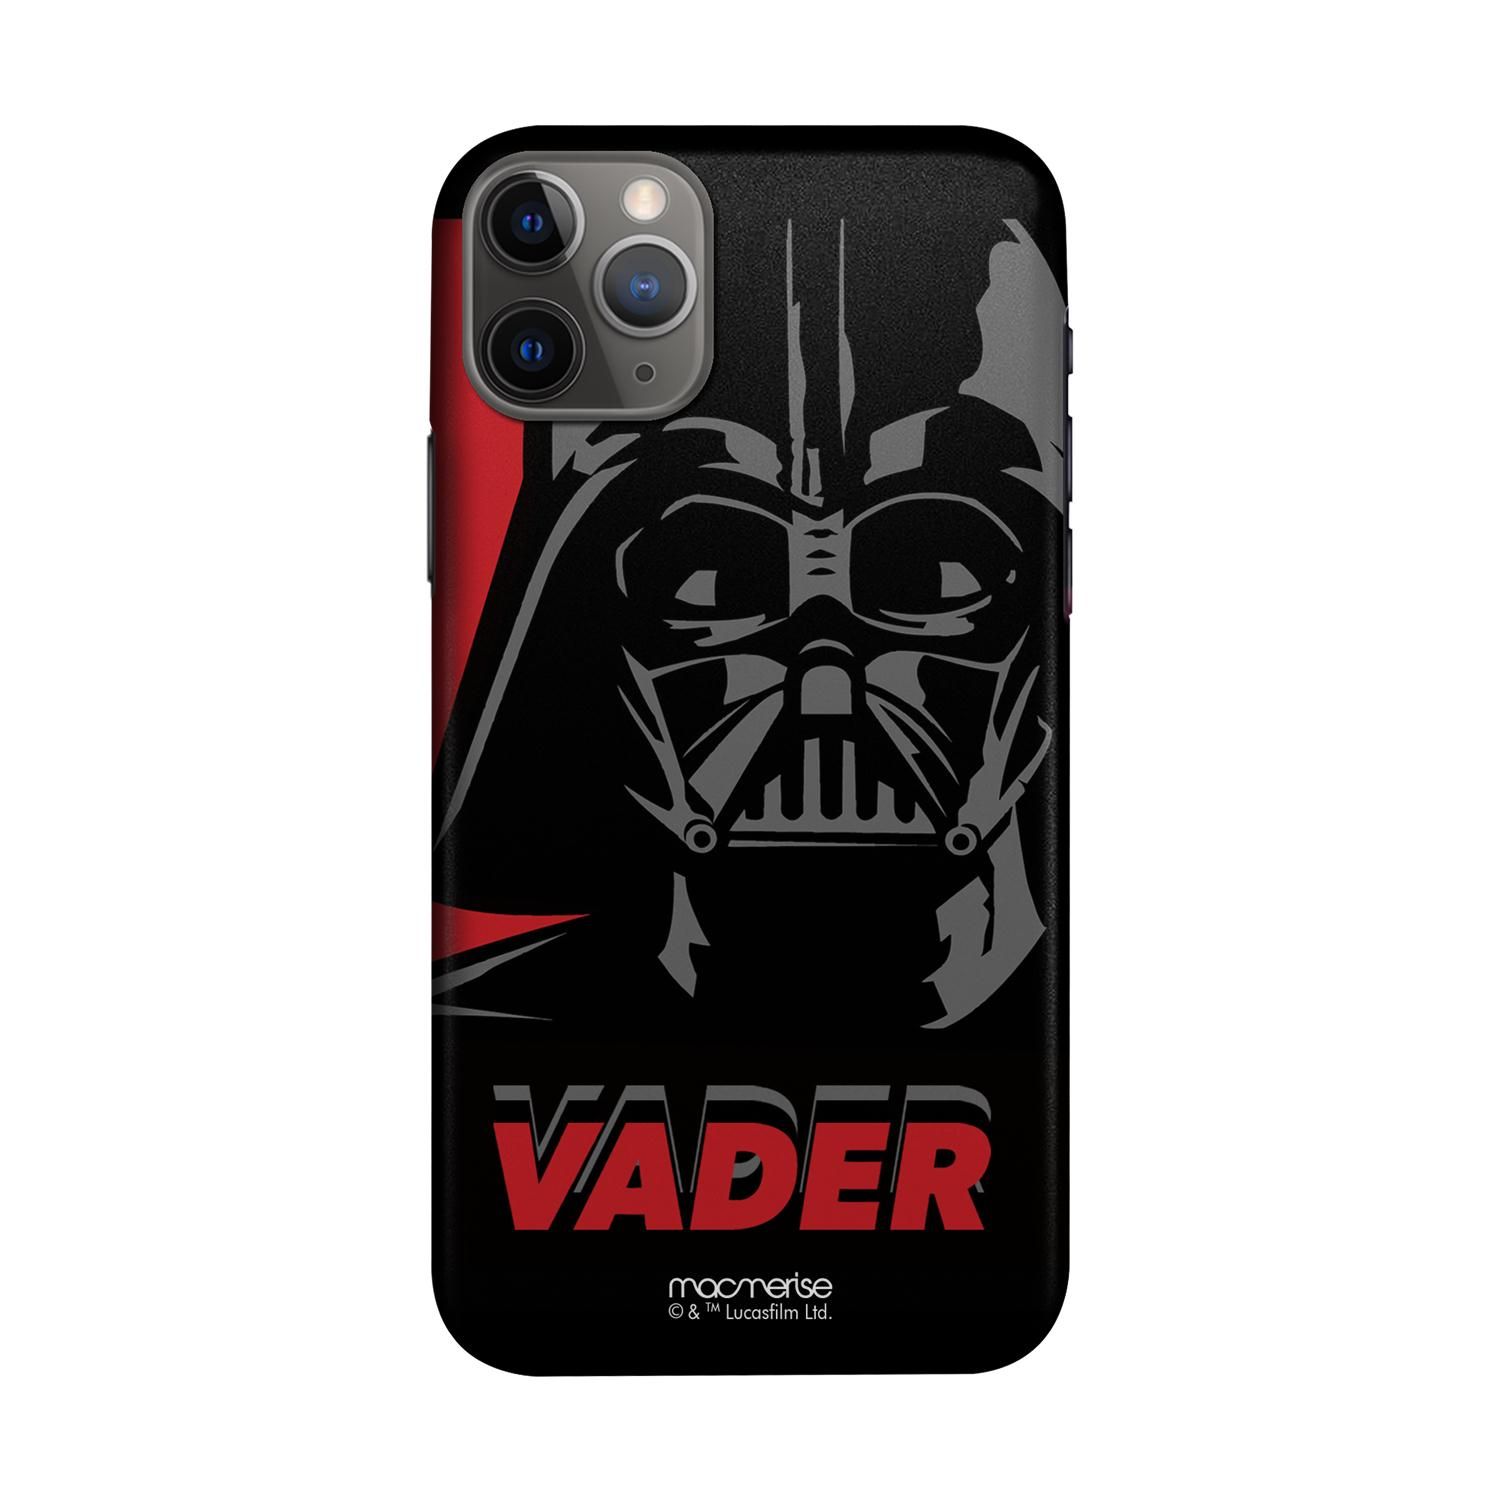 Buy Vader - Sleek Phone Case for iPhone 11 Pro Max Online